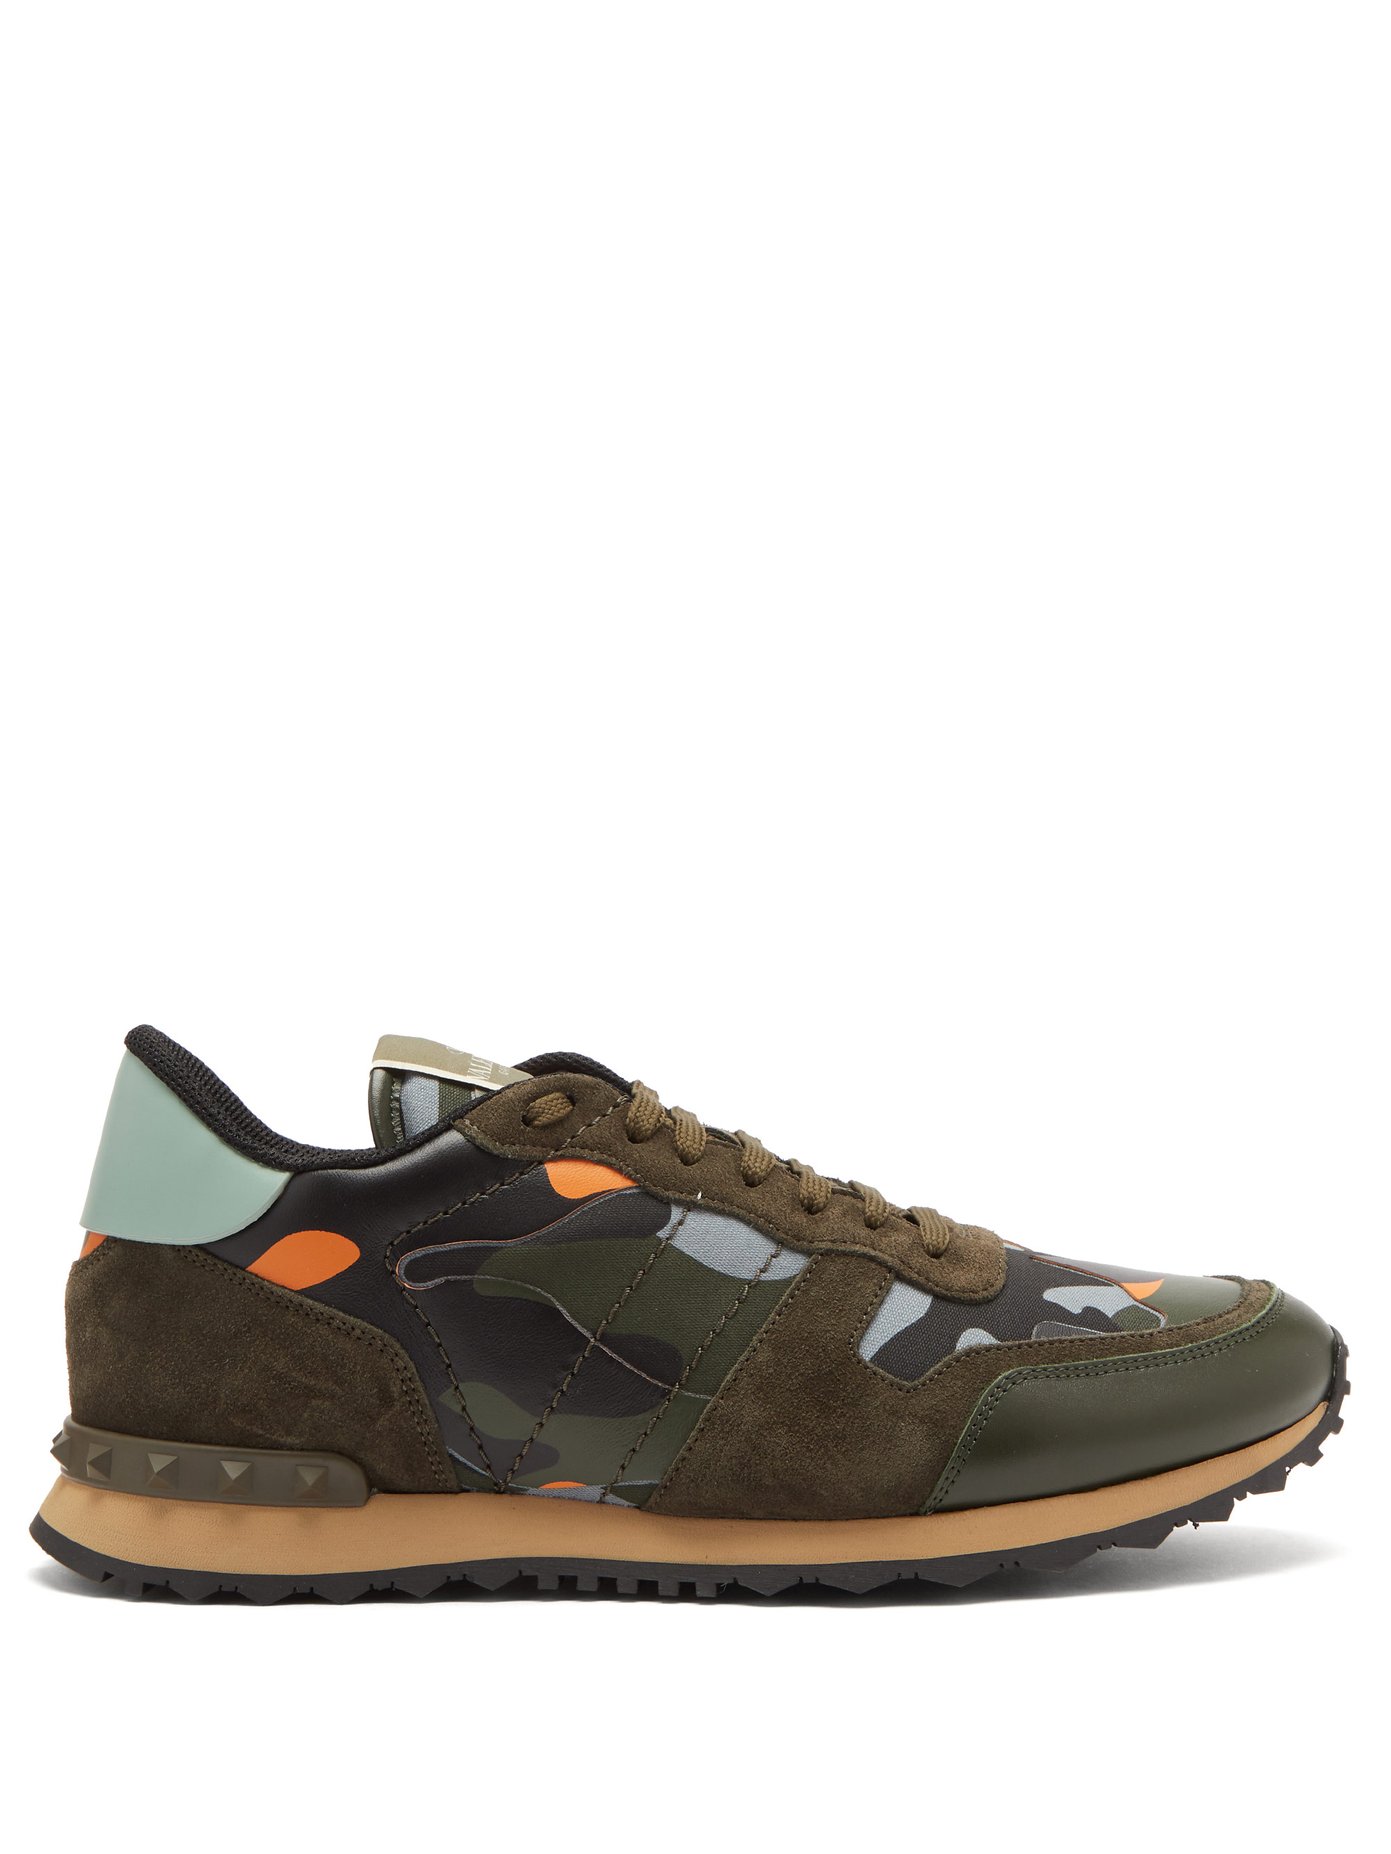 valentino black blue and orange camouflage rockrunner leather sneakers